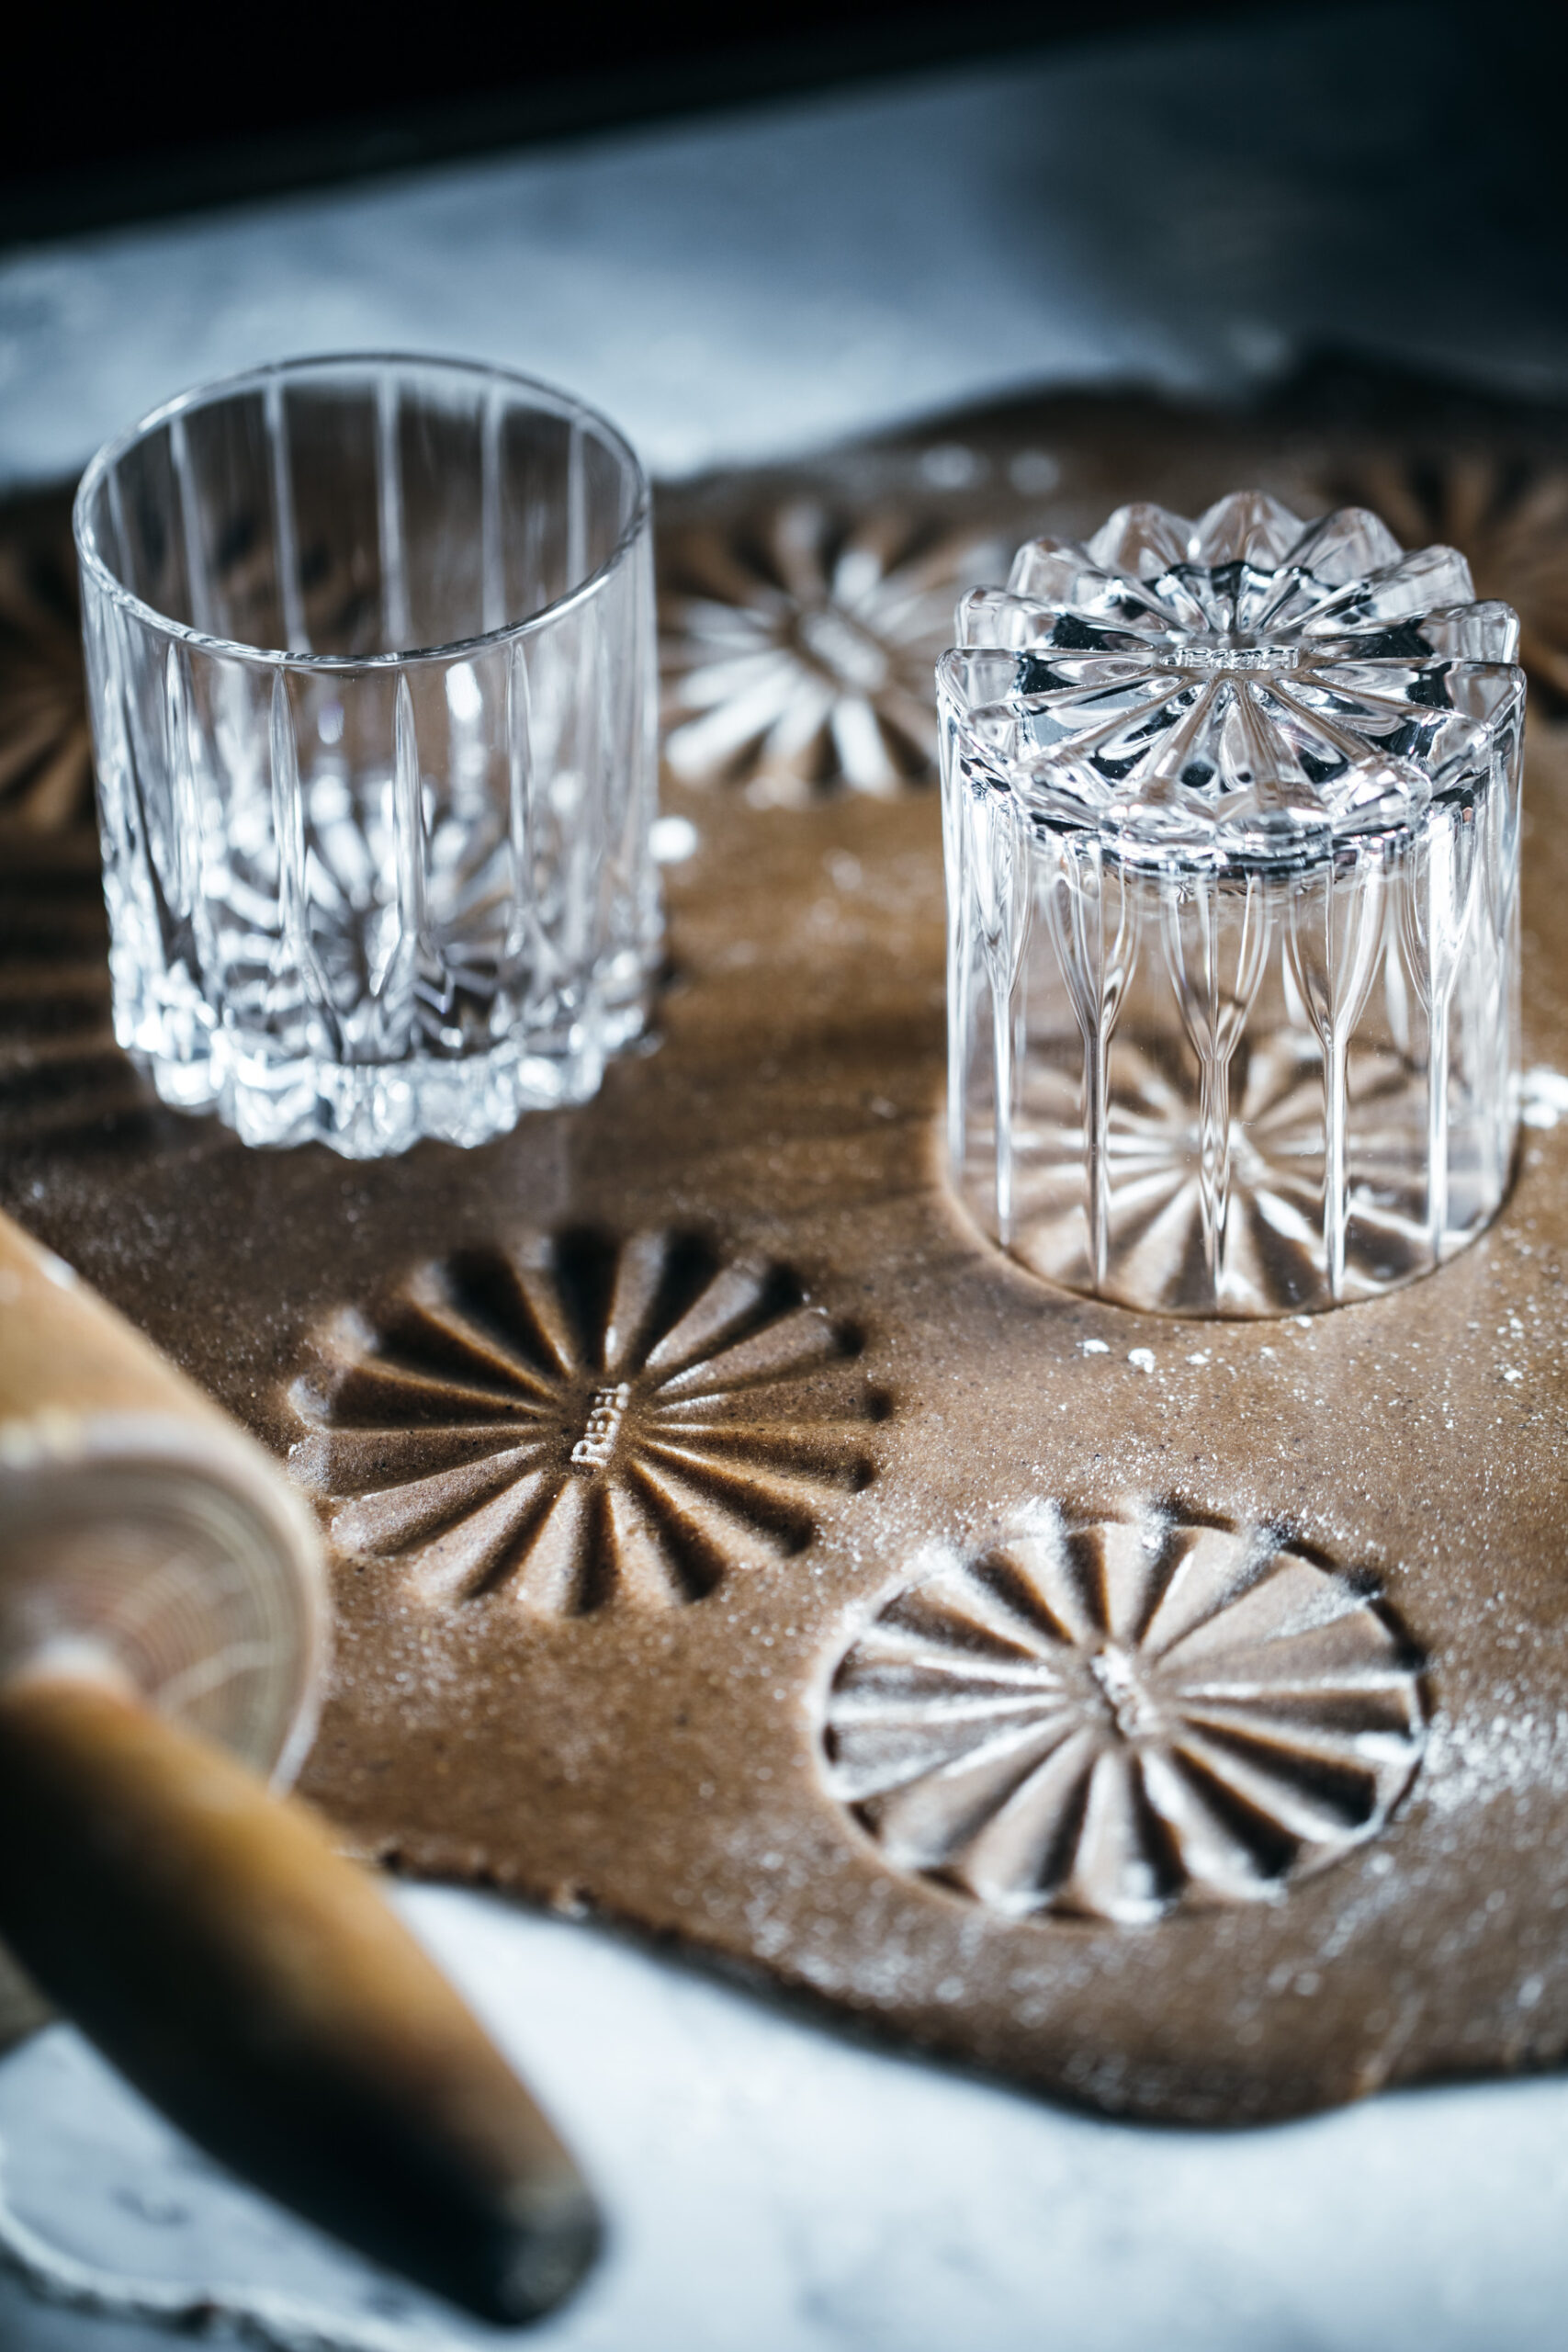 Crispy gingerbread with patterns from glasses